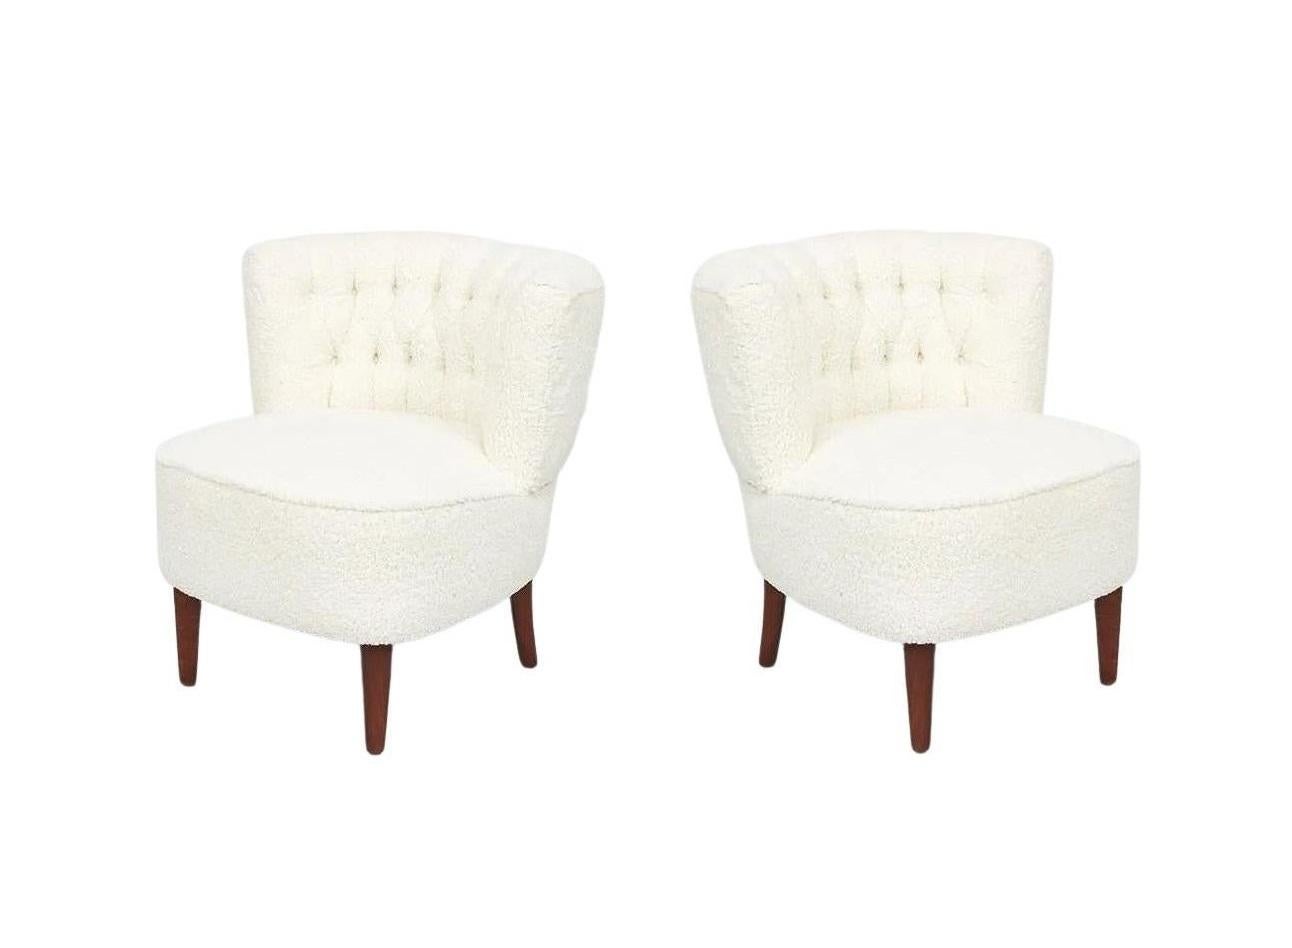 Mid-Century Otto Schultz Lounge Chairs in Bouclé, Sweden, ca 1950s For Sale 6